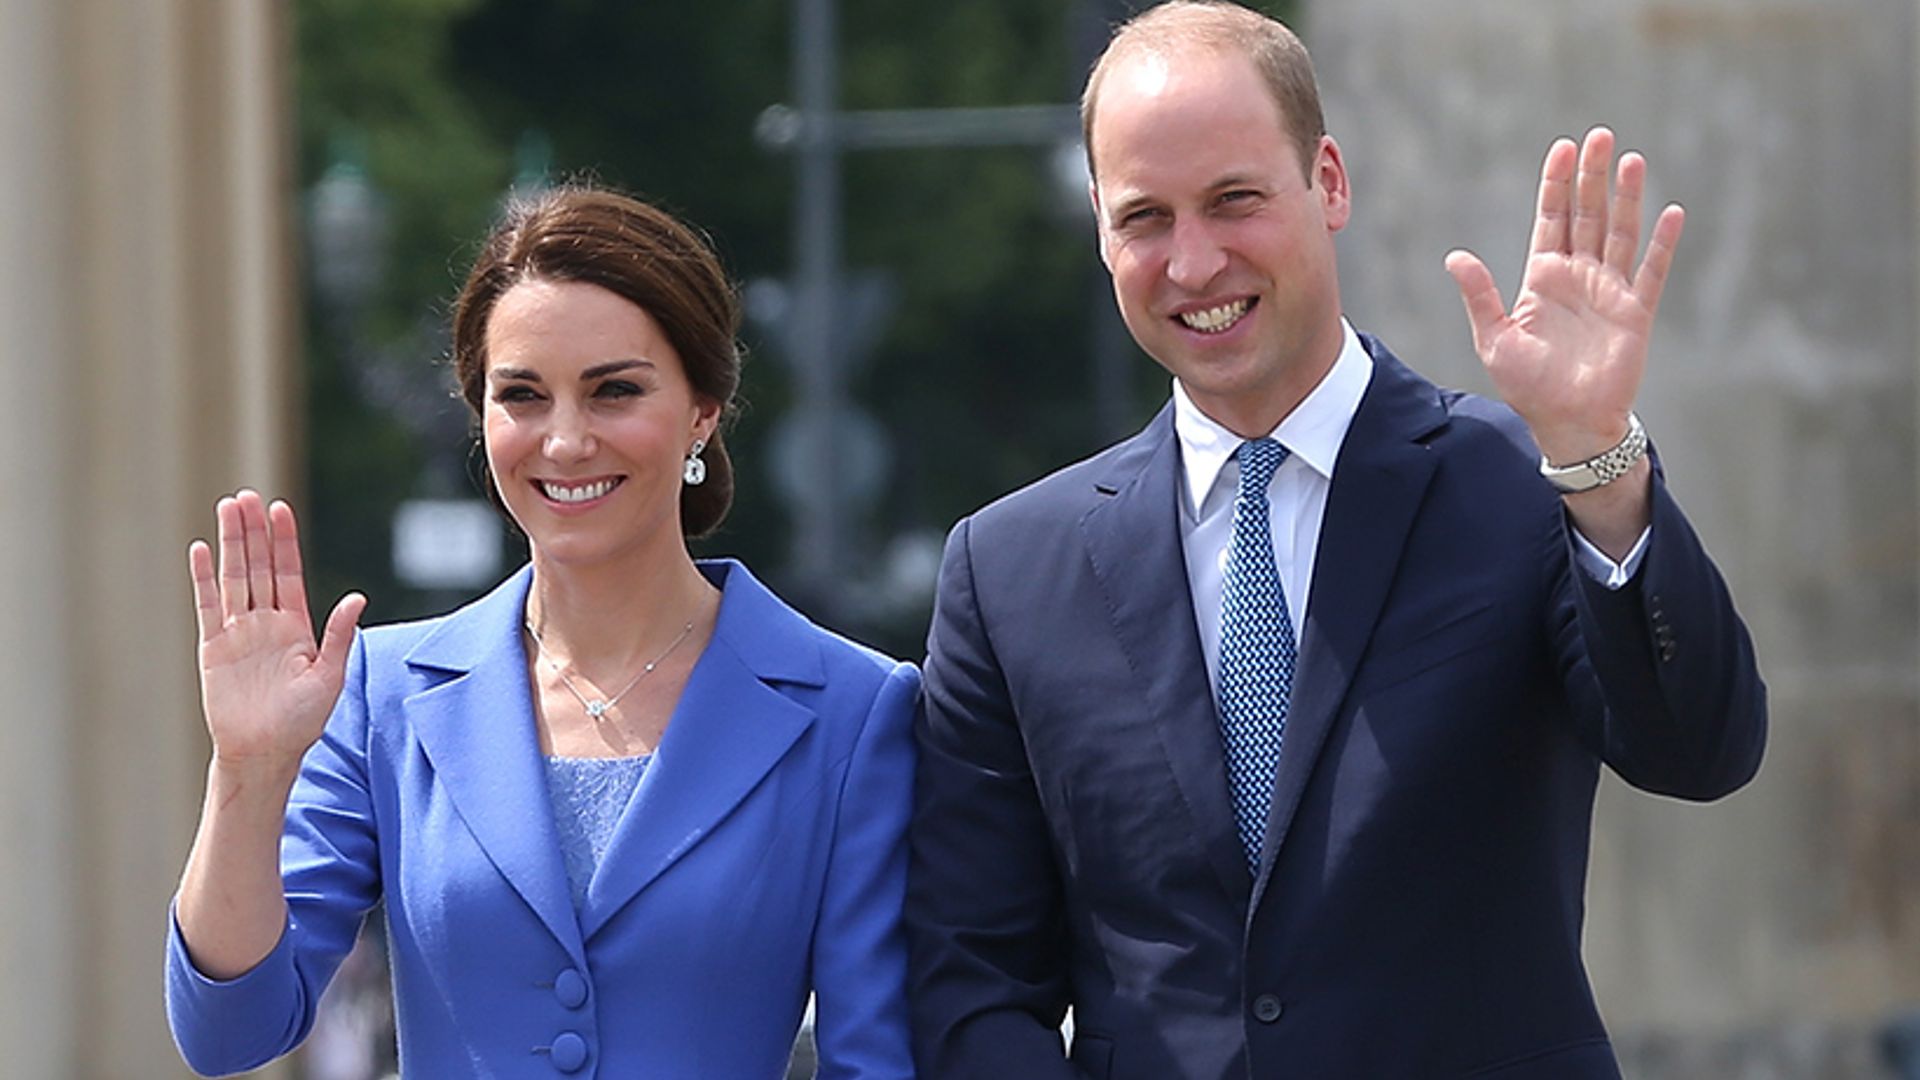 Just more proof that Prince William and Kate Middleton are so perfectly